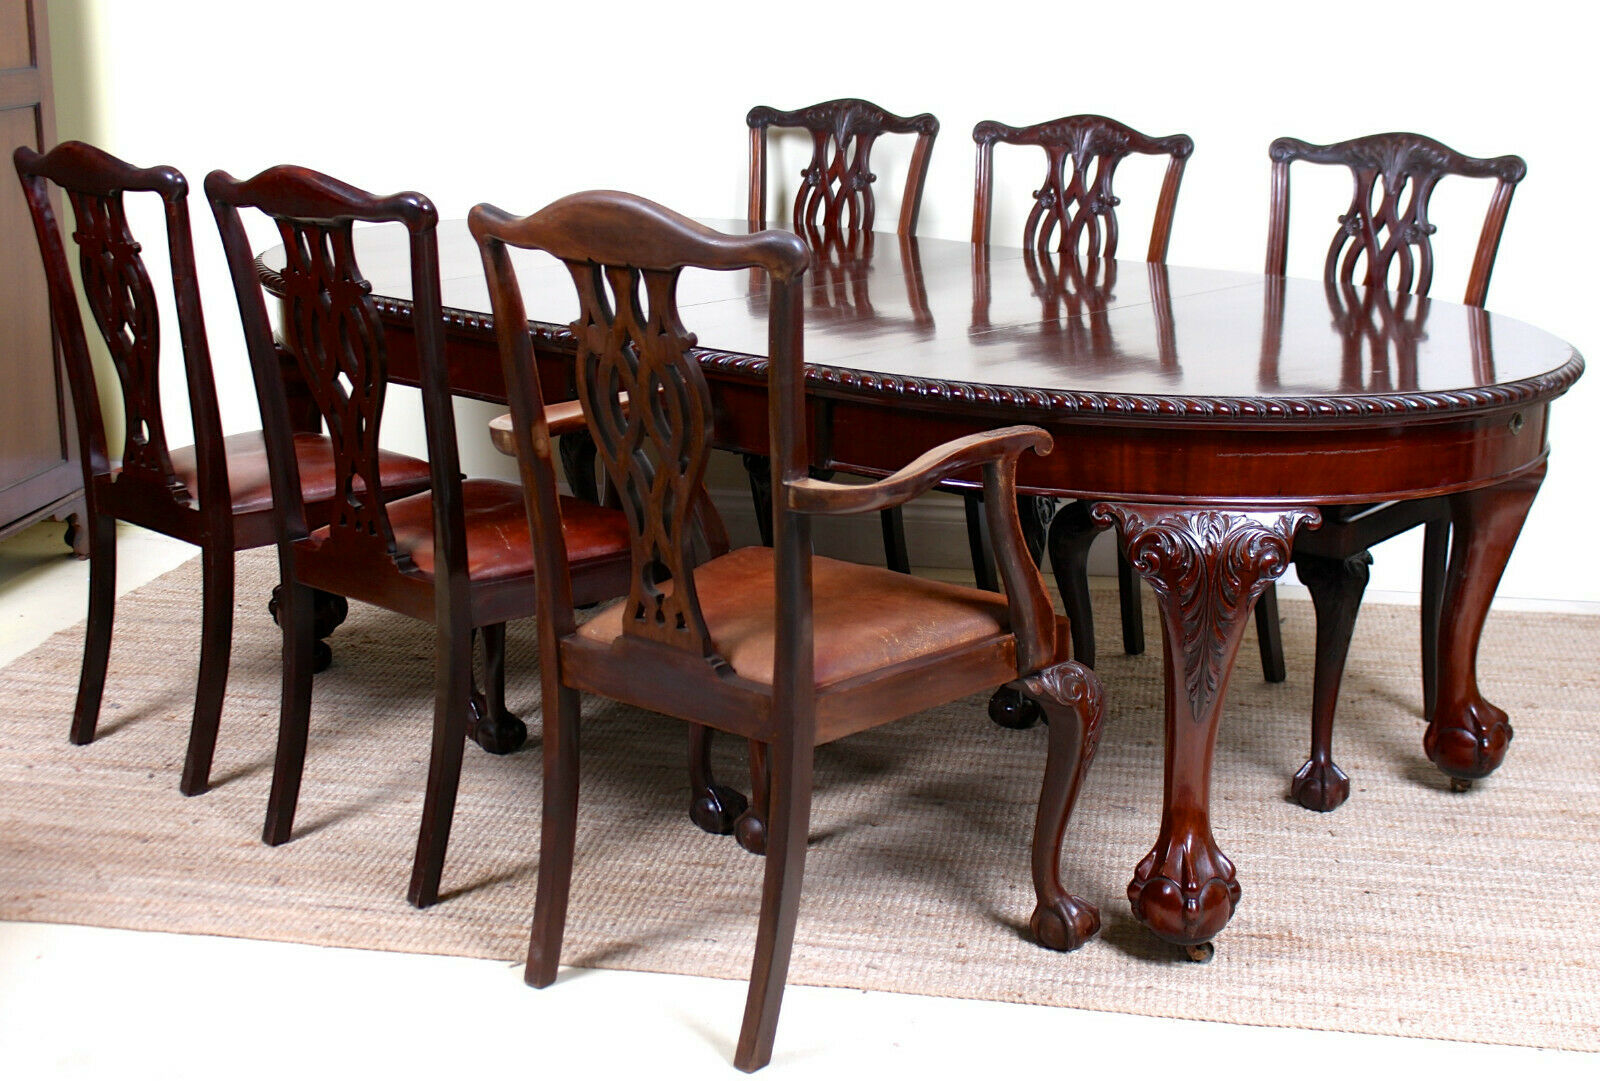 Antique Iak Dining Room Table And Chairs